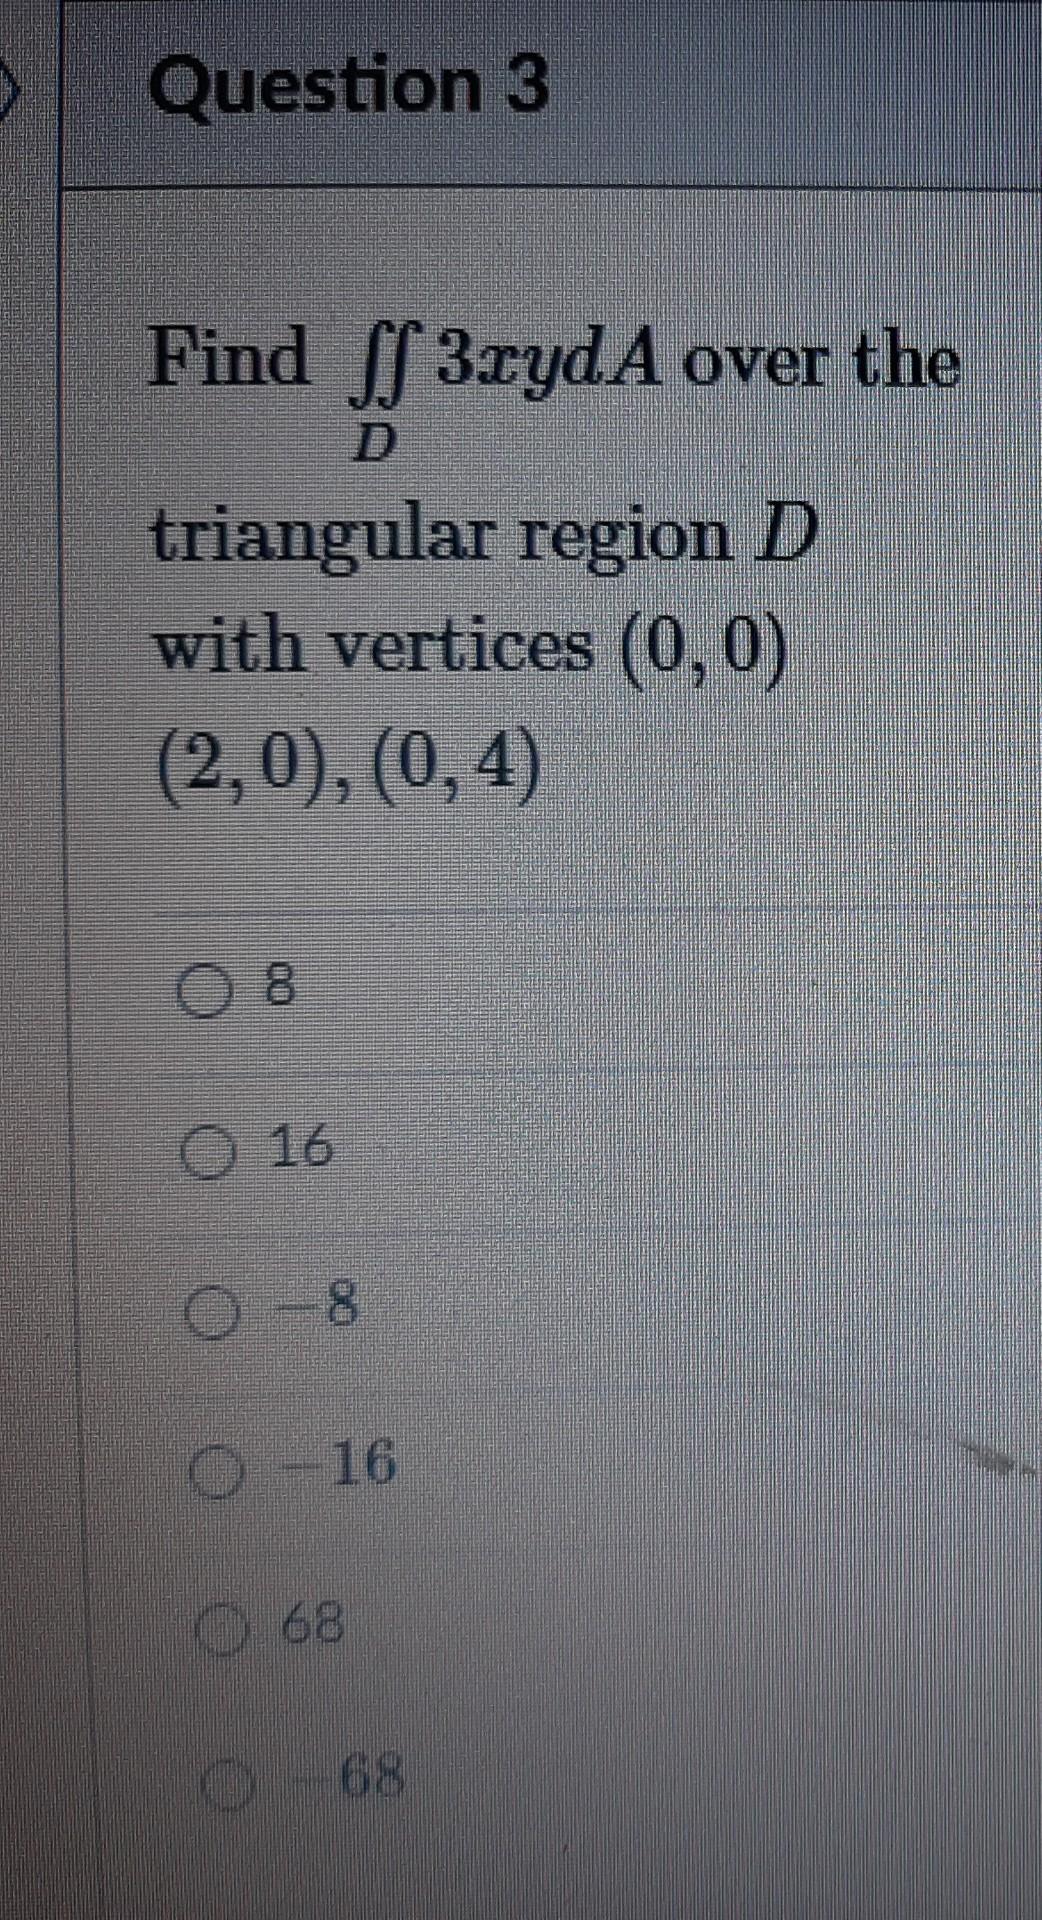 Question 3 Find Sf 3ryda Over The Triangular Region D With Vertices 0 0 2 0 0 4 O 16 8 0 16 0 68 68 1